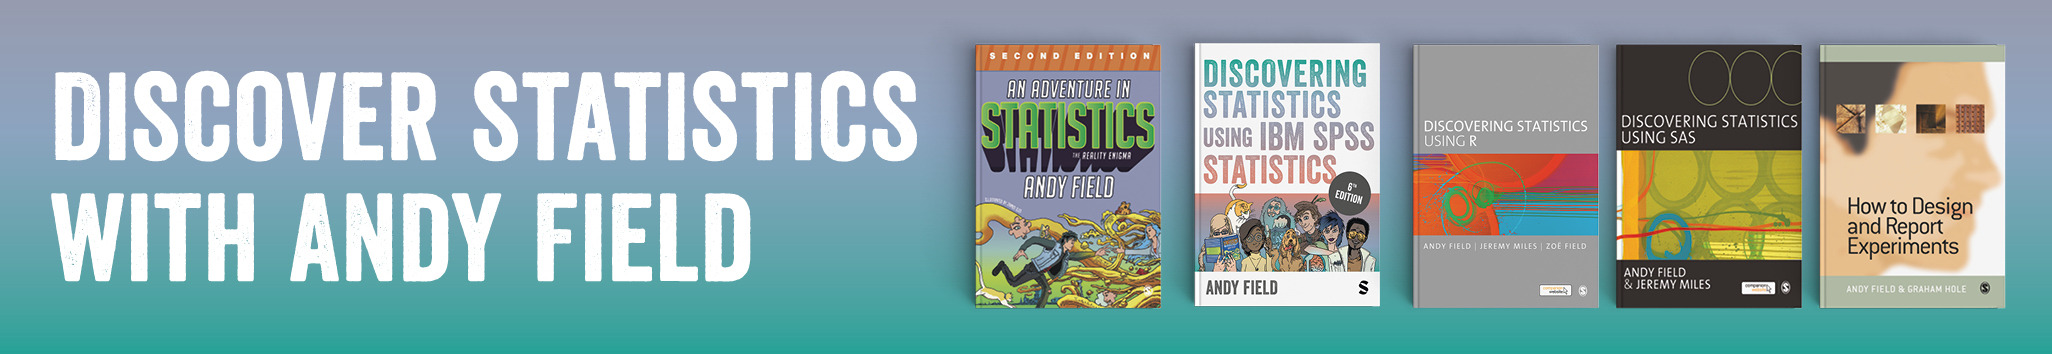 Discovering Statistics with Andy Field